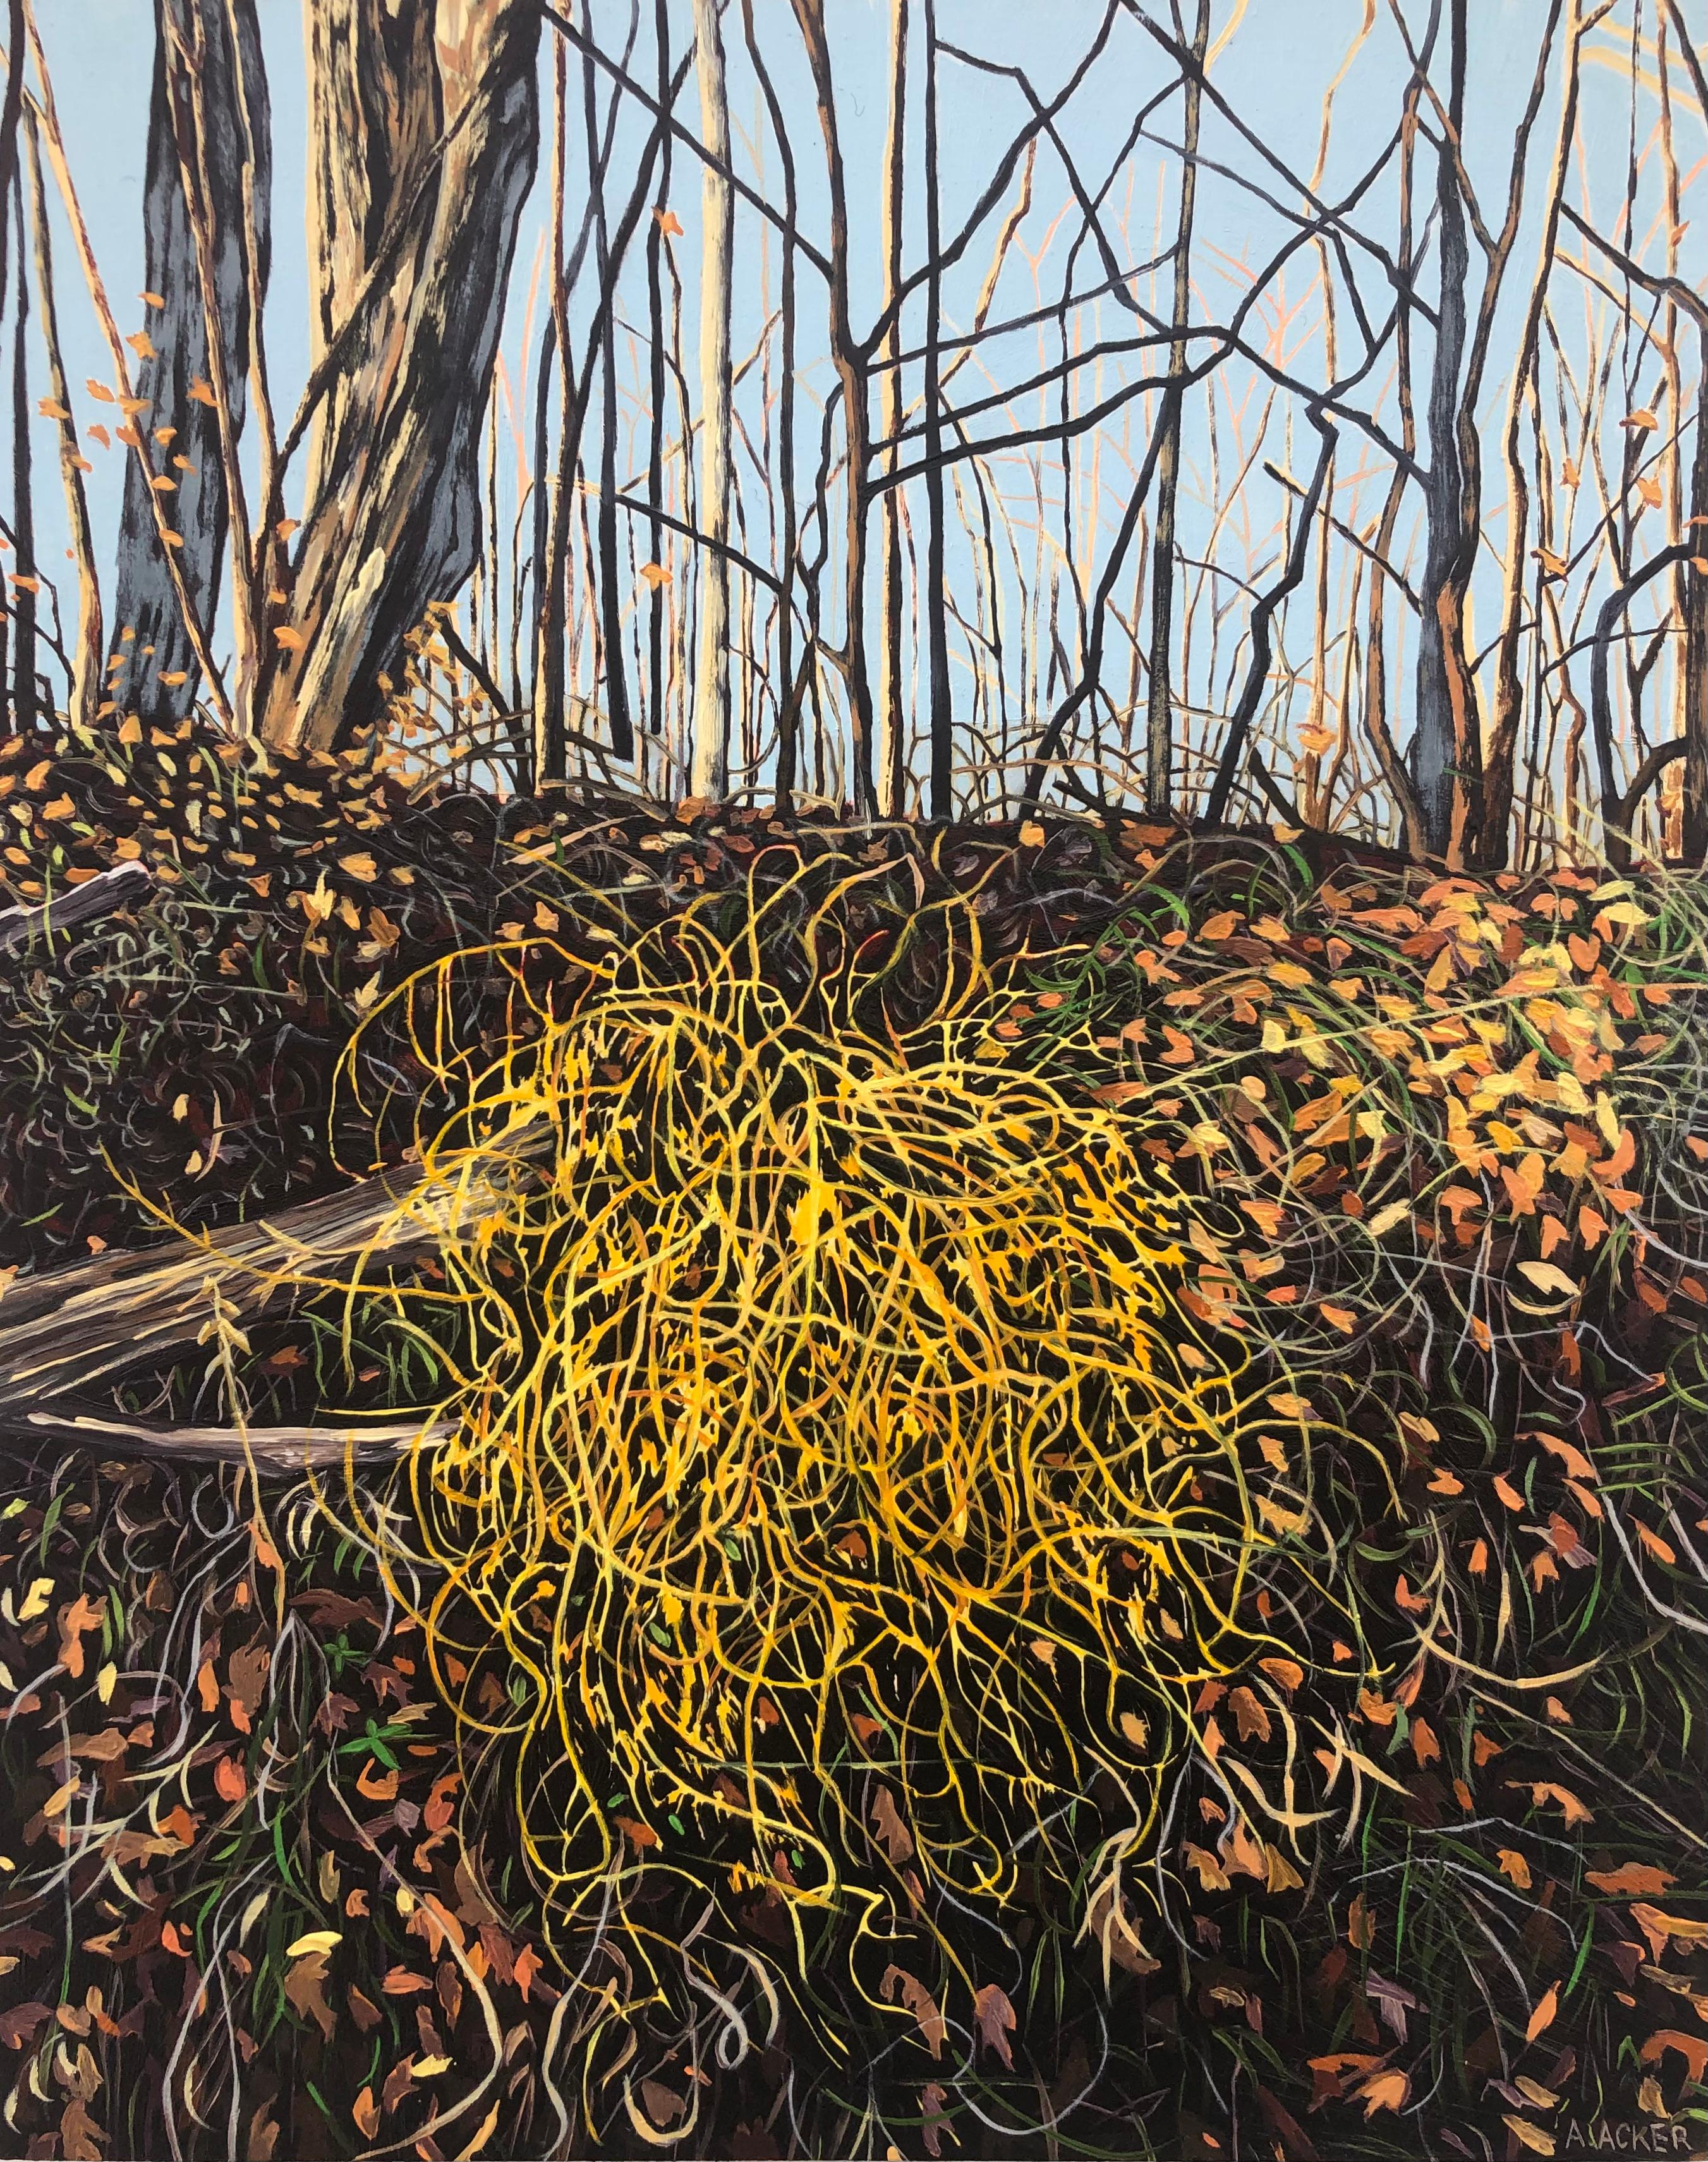 Amanda Acker Landscape Painting - Wild Asparagus, Yellow Bush in Forest, Trees, Blue Sky, Leaves on Ground